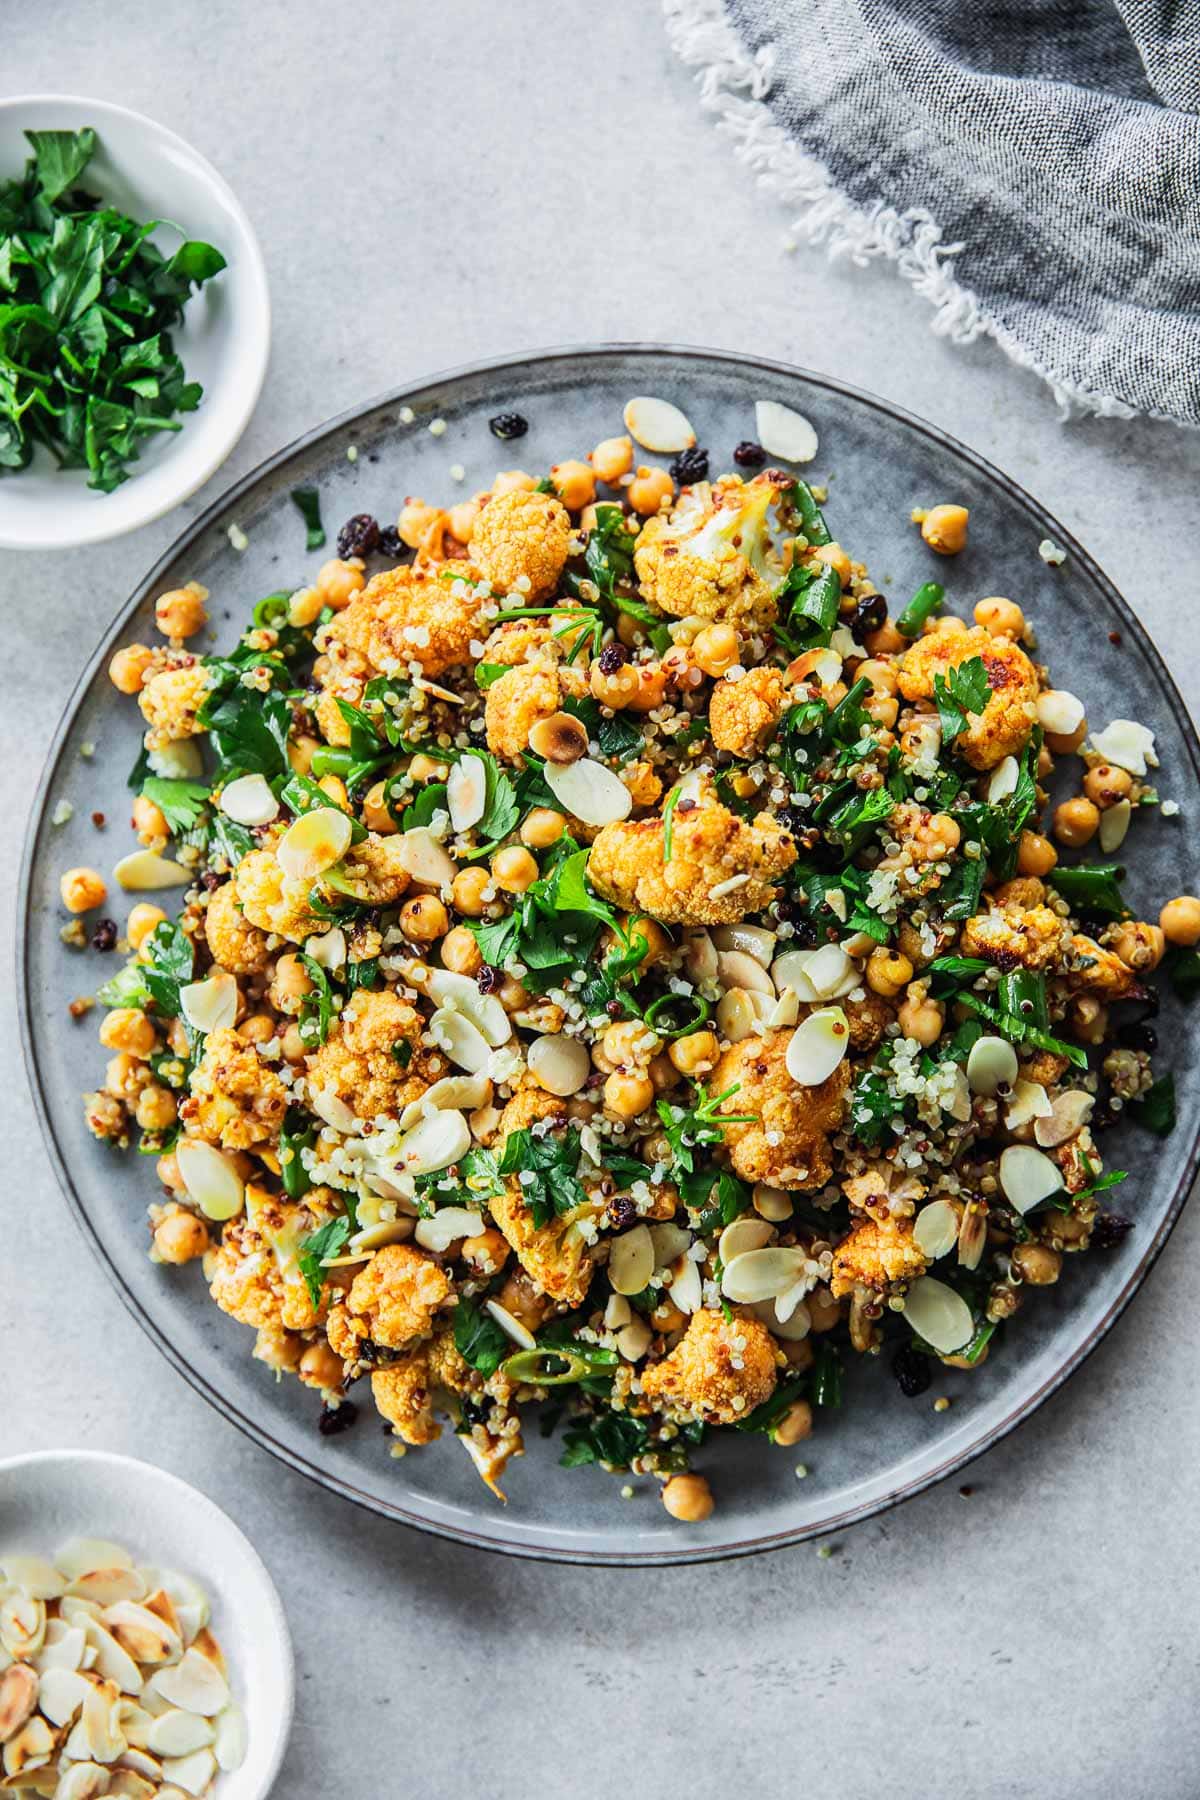 Roasted Cauliflower Salad With Chickpeas And Quinoa served in a salad platter with extra parsley and almond flakes on the side.